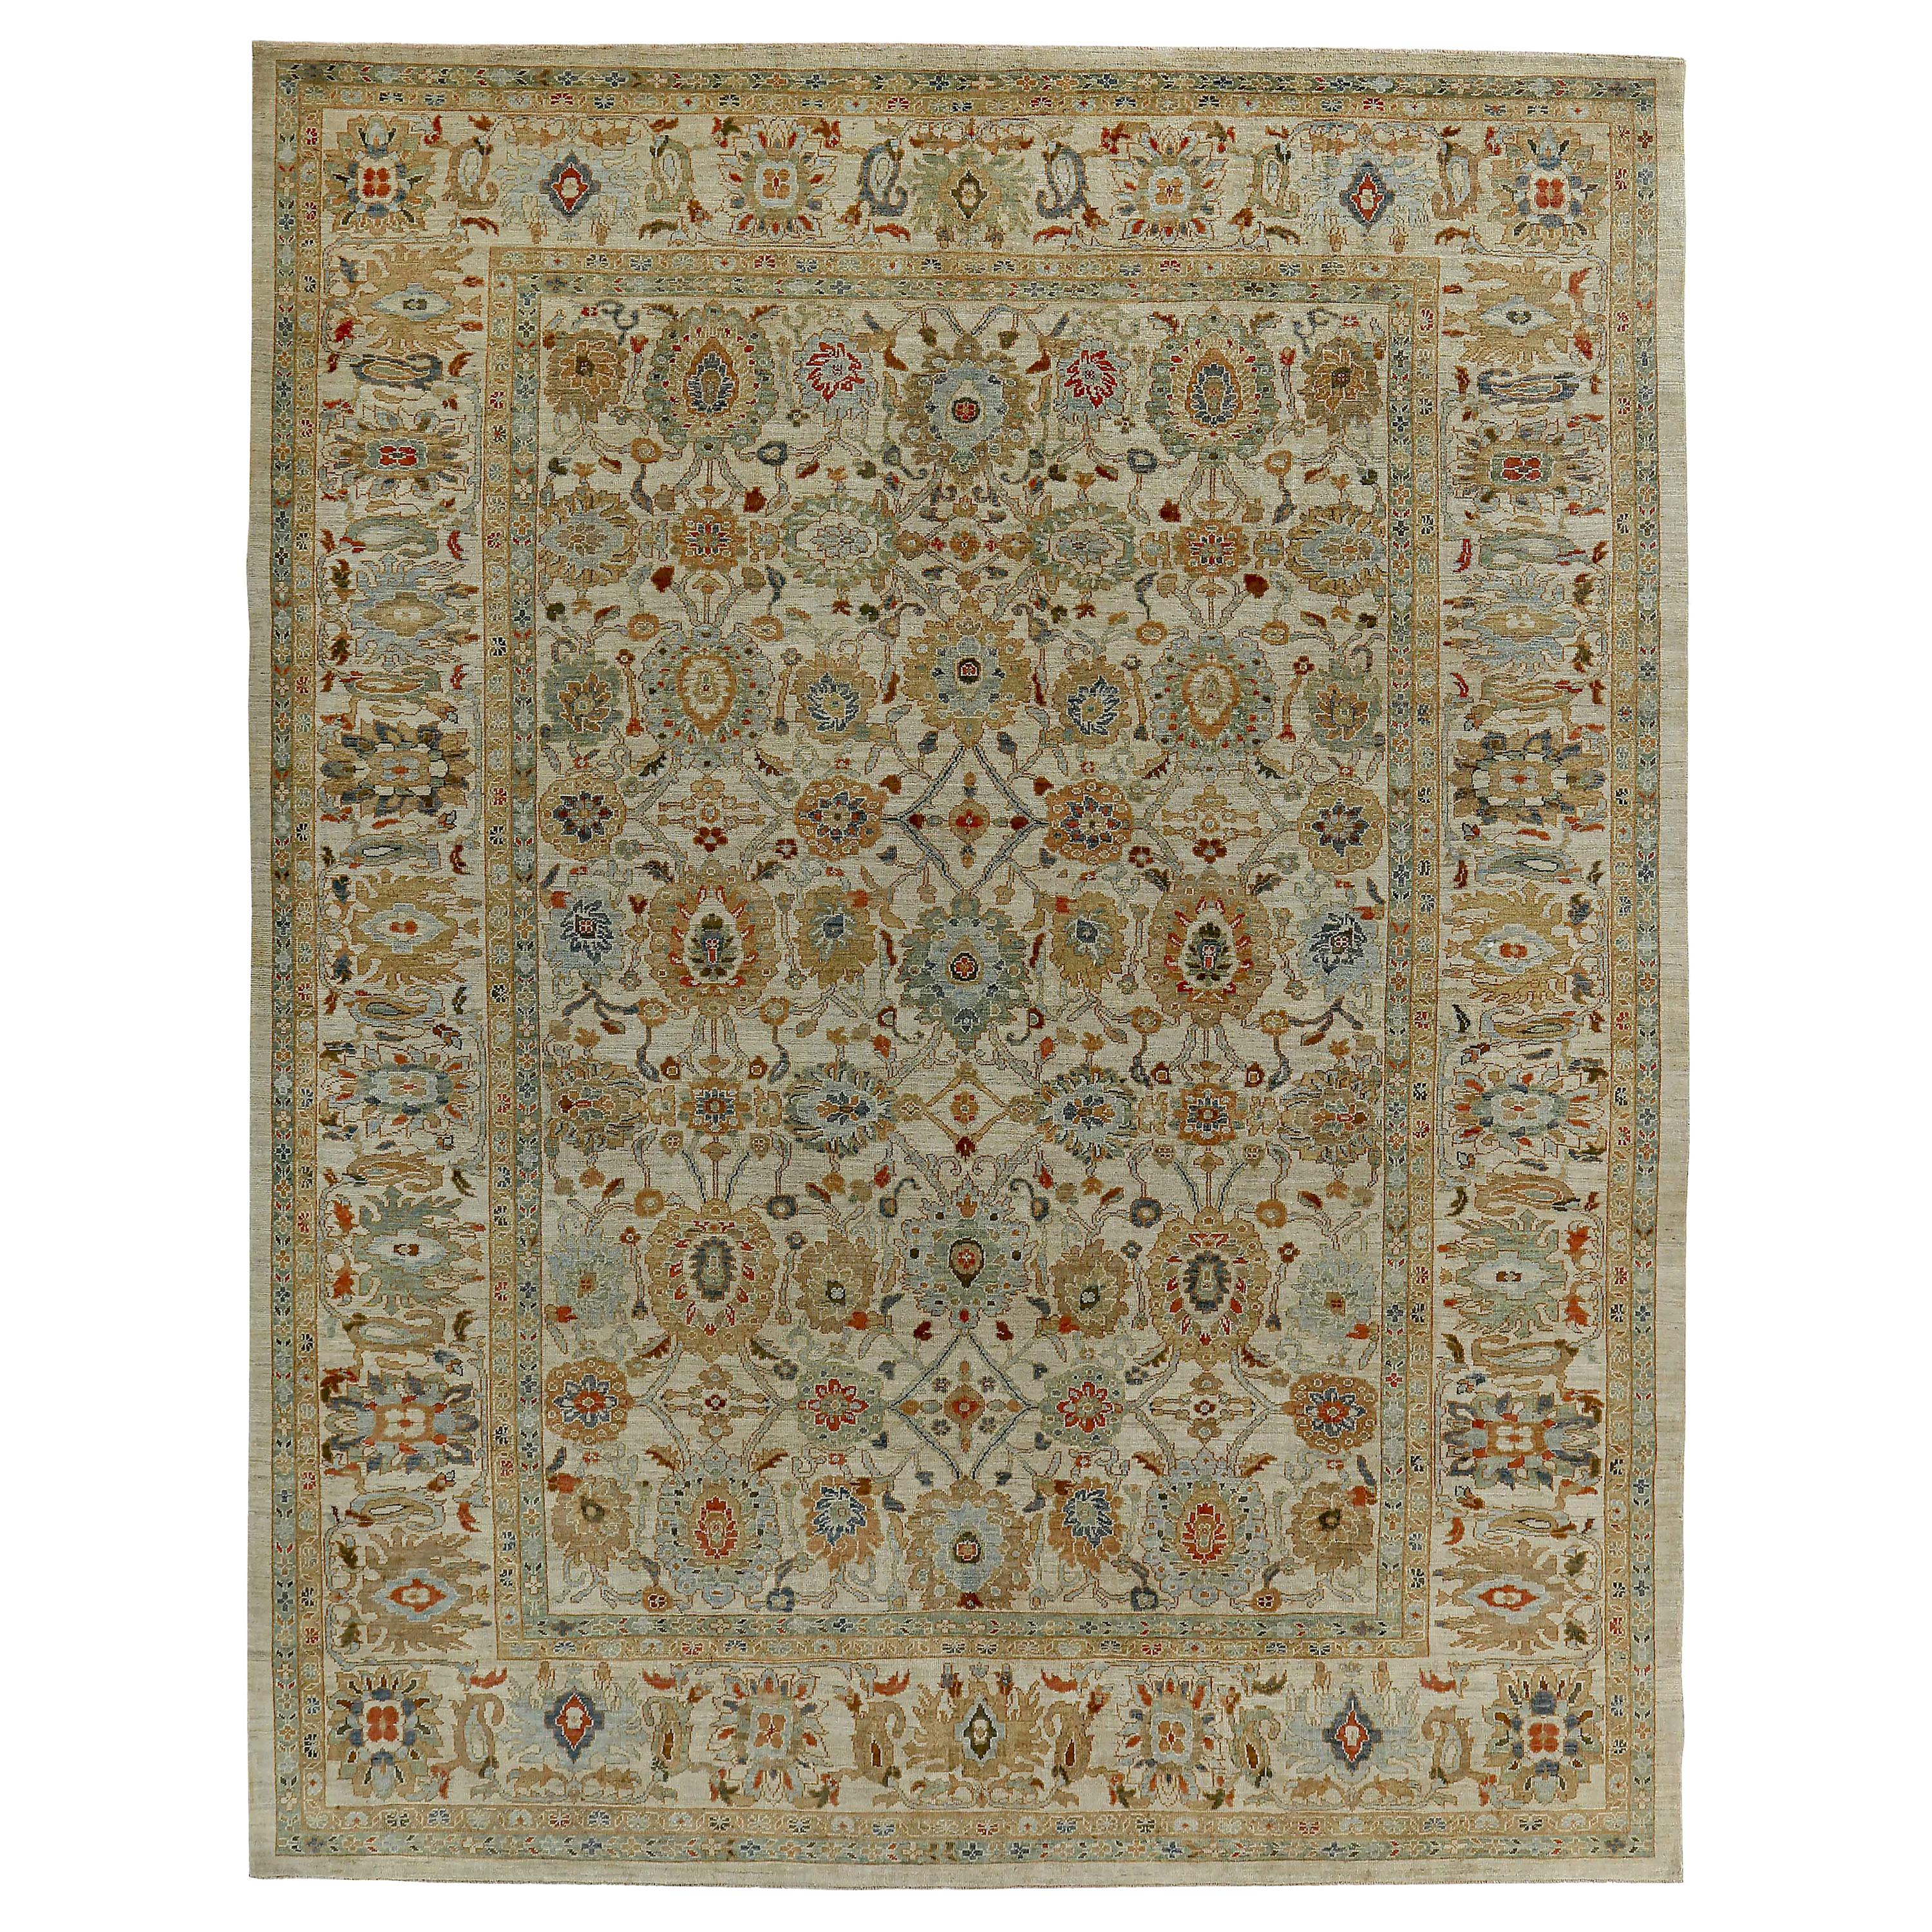 New Turkish Rug Sultanabad Design with Gray and Brown Botanical Details For Sale